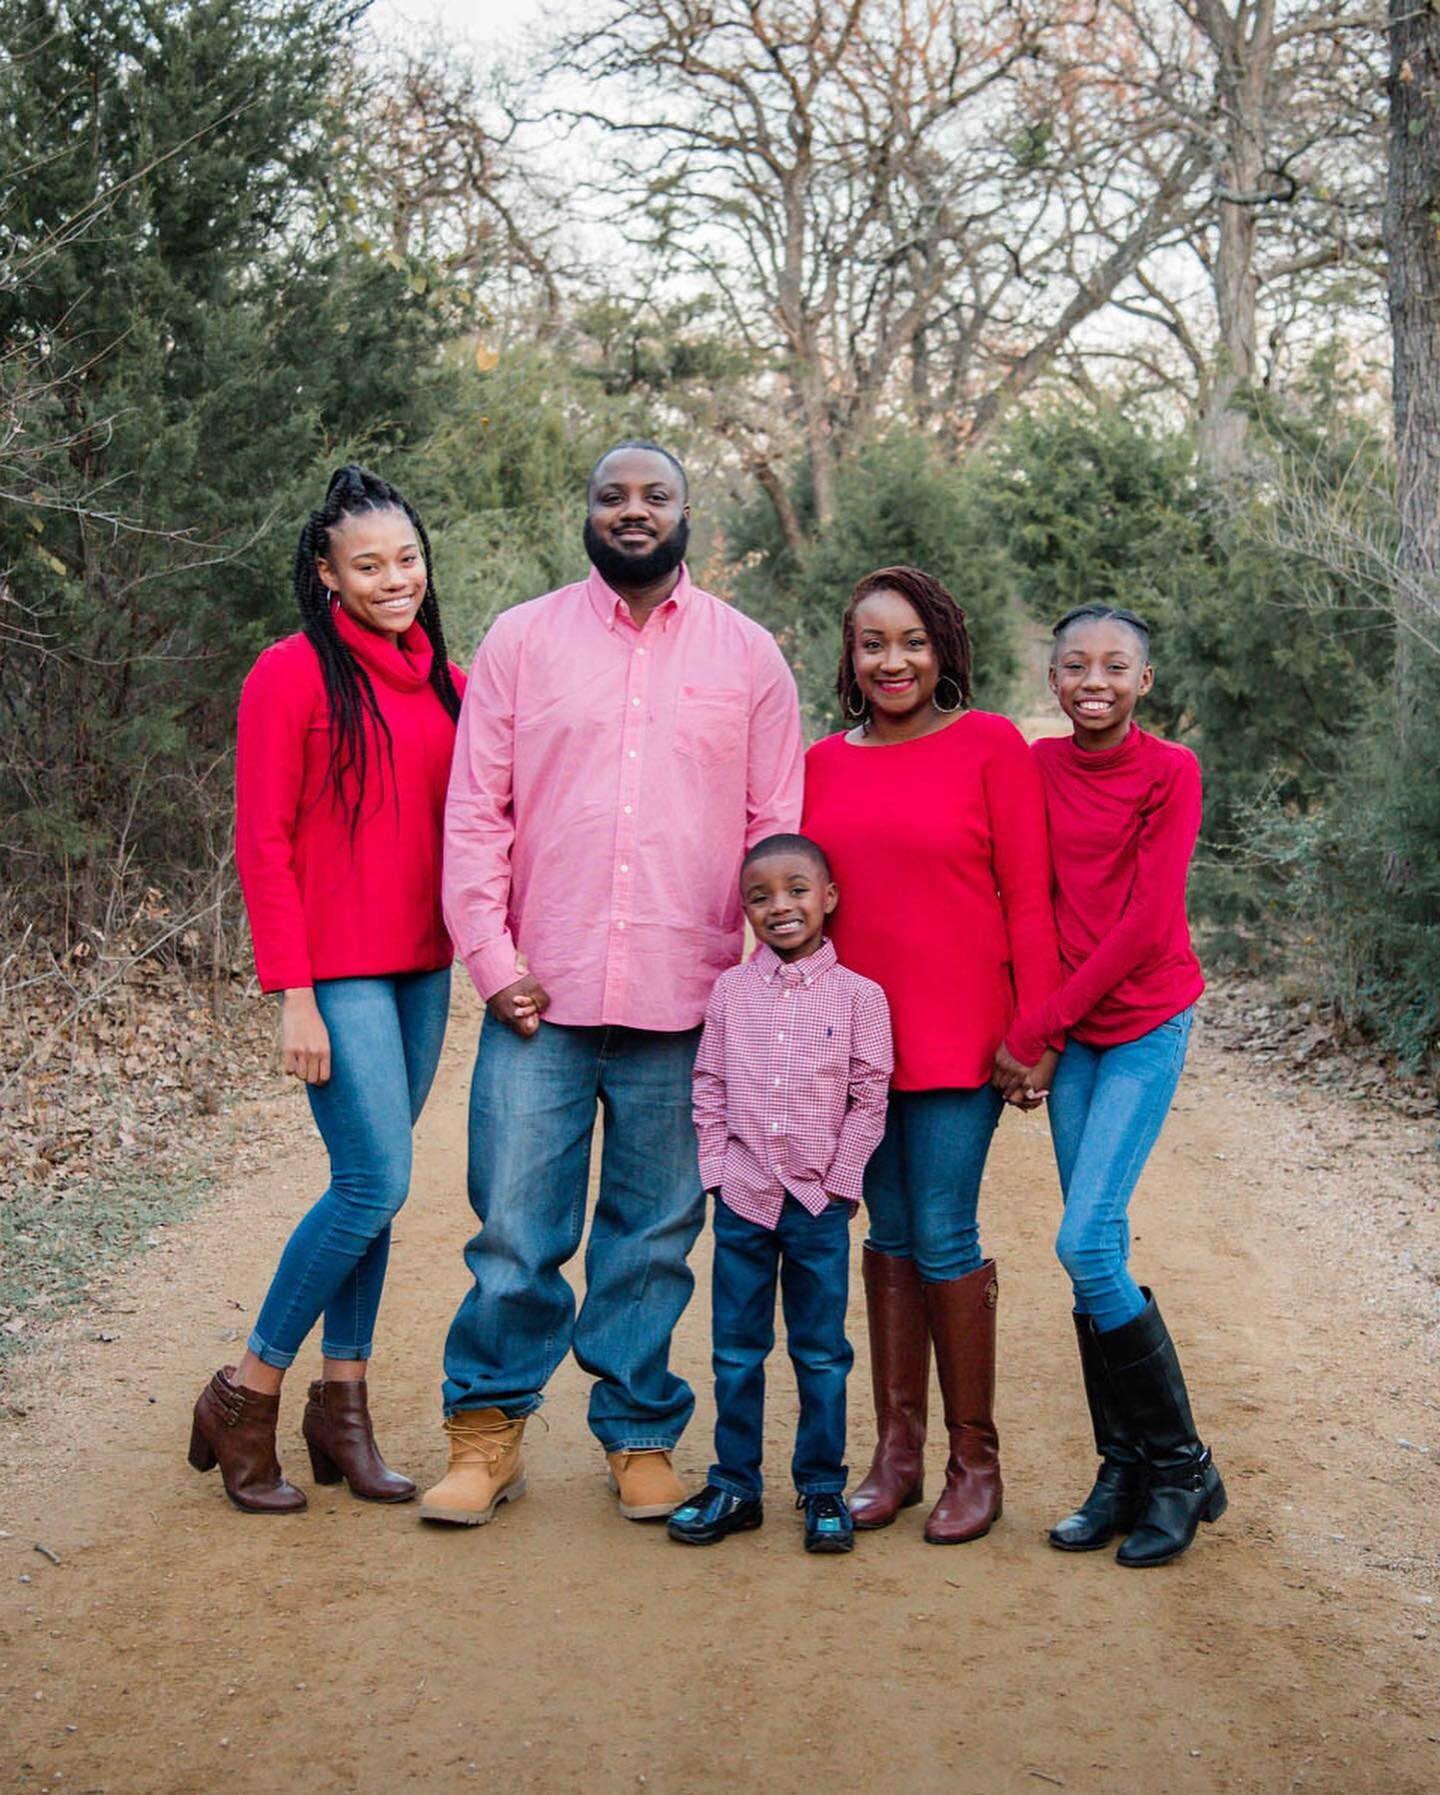 Sneak peek from yesterday&rsquo;s session. My toddler and I have been home with the flu, but I&rsquo;m finally getting back to life. It felt good to leave the house and be productive. #dallasphotographer #christmasphotoshoot #christmasphotos #familyp